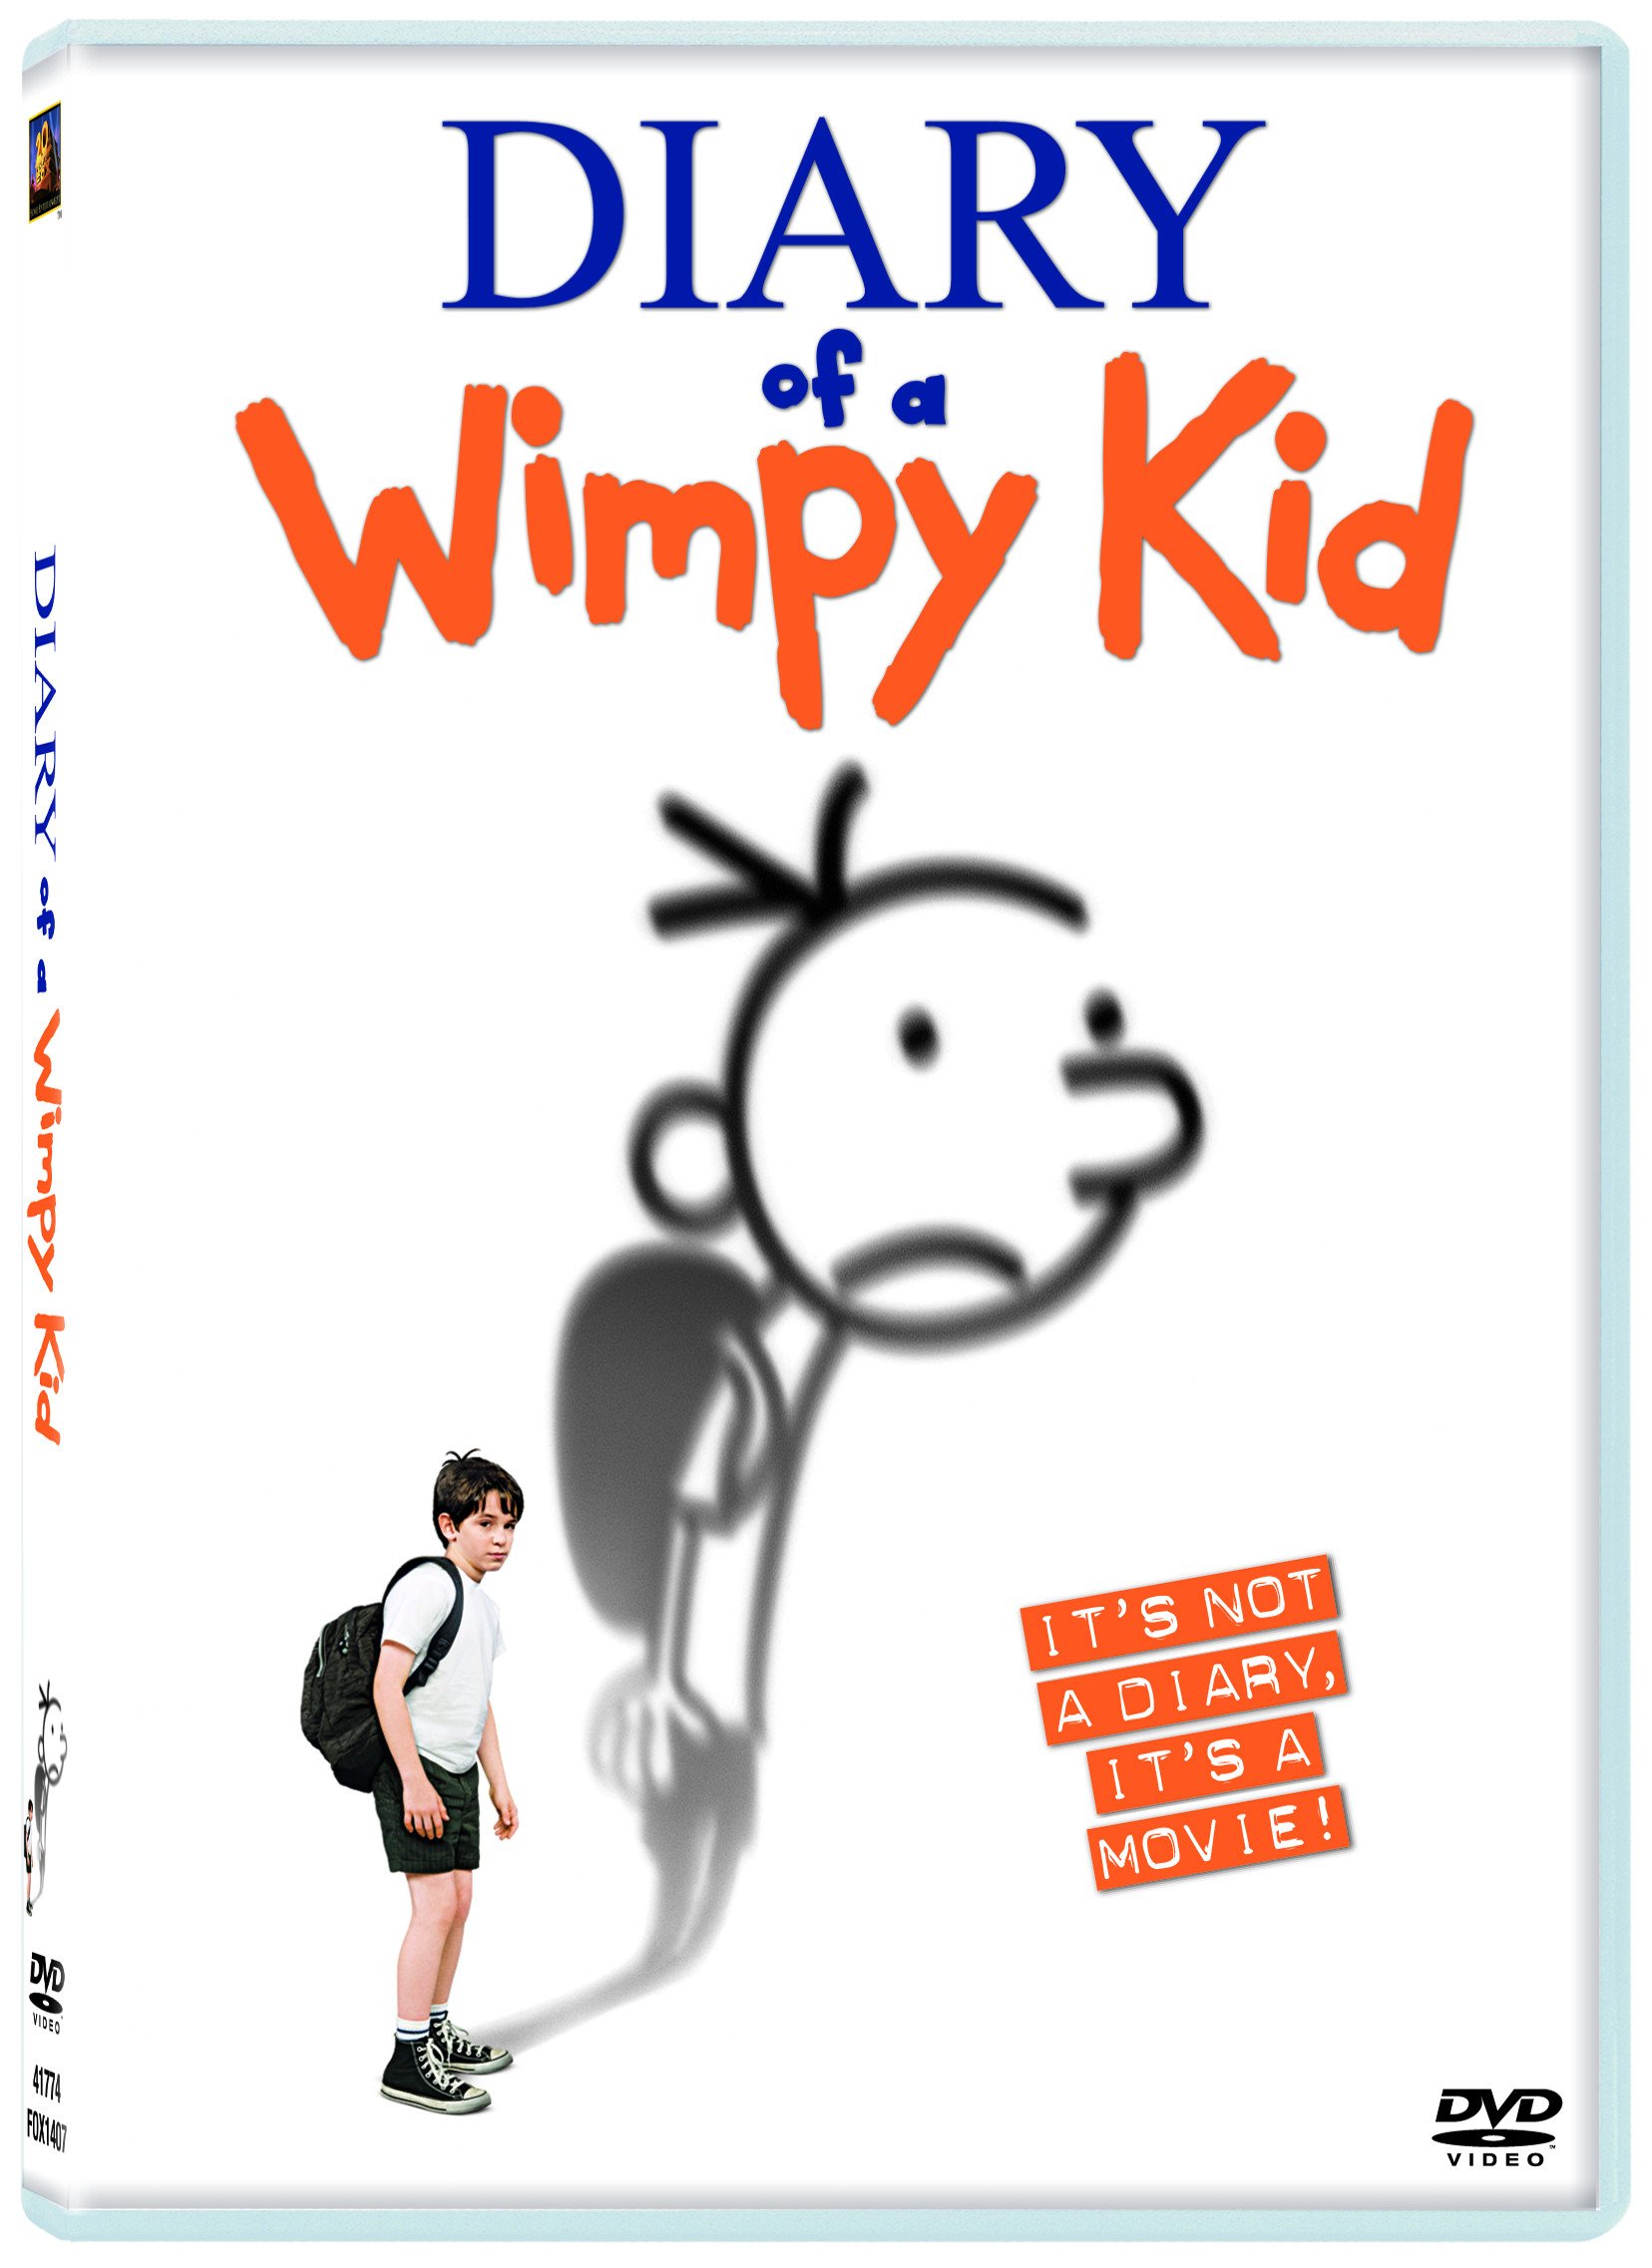 diary-of-a-wimpy-kid-movie-purchase-or-watch-online